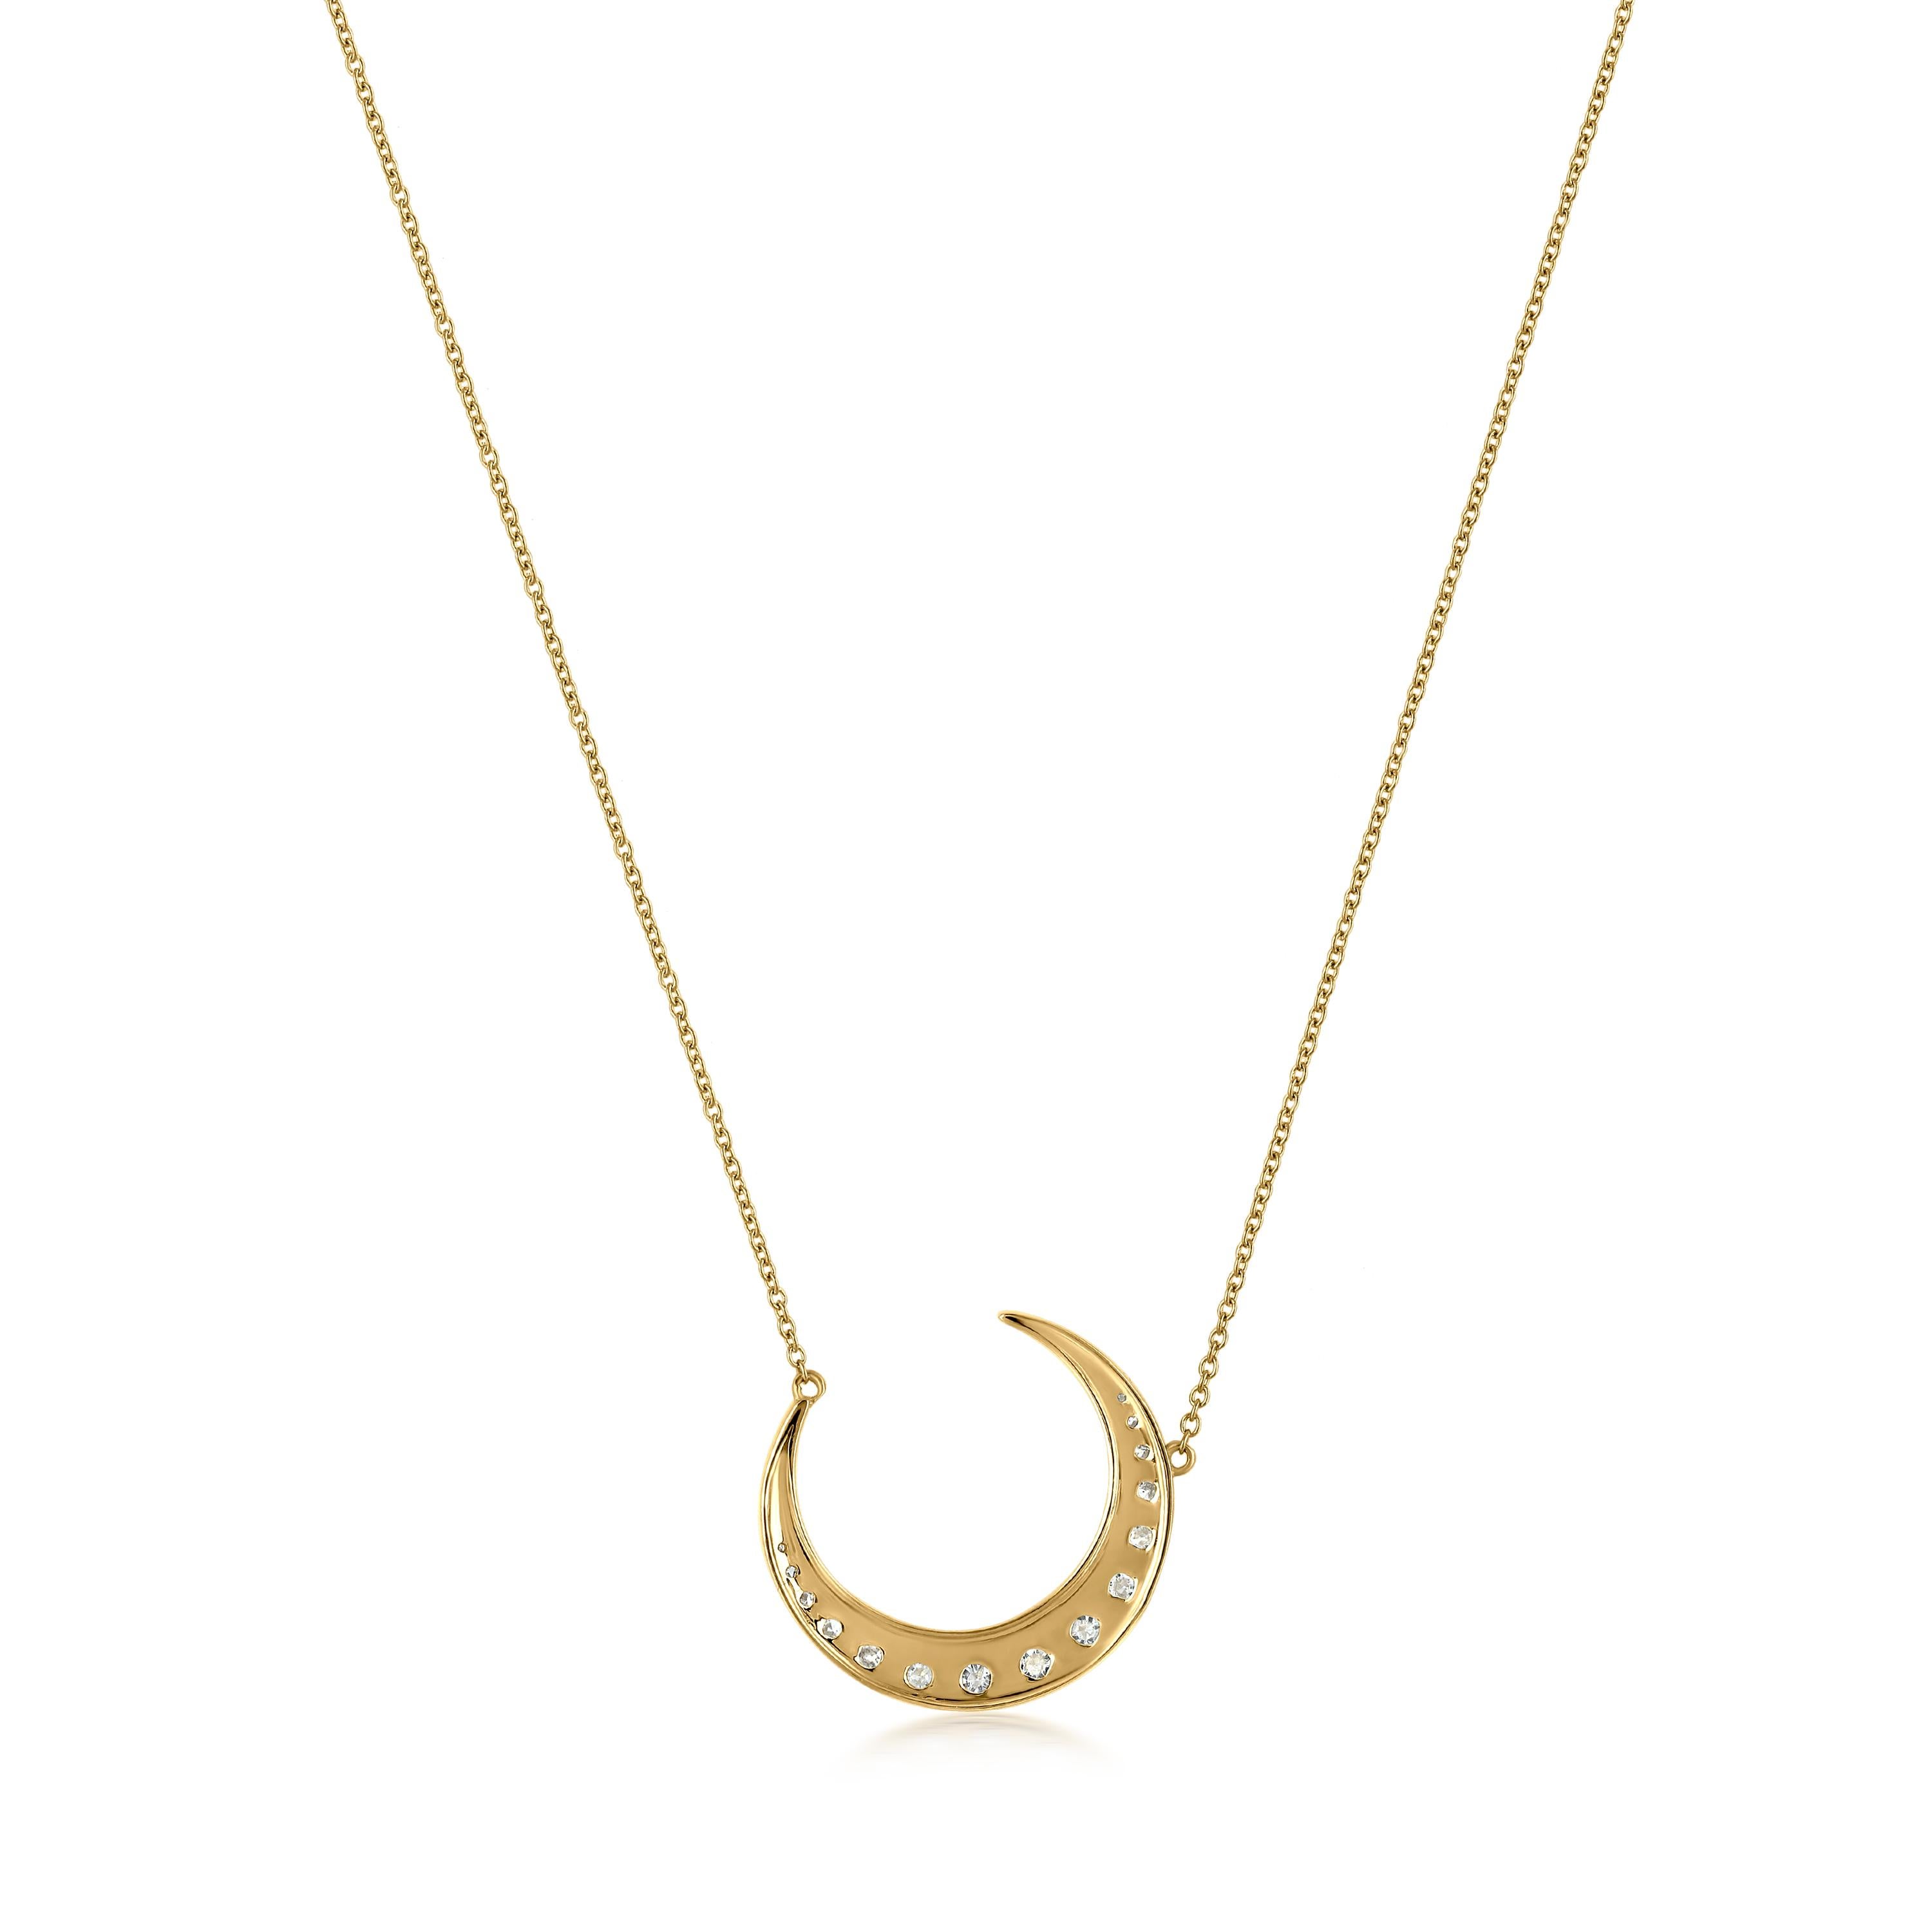 Round Cut Luxle 5/8 Carat T.W. Diamond Crescent Moon Pendant Necklace in 14k Yellow Gold For Sale